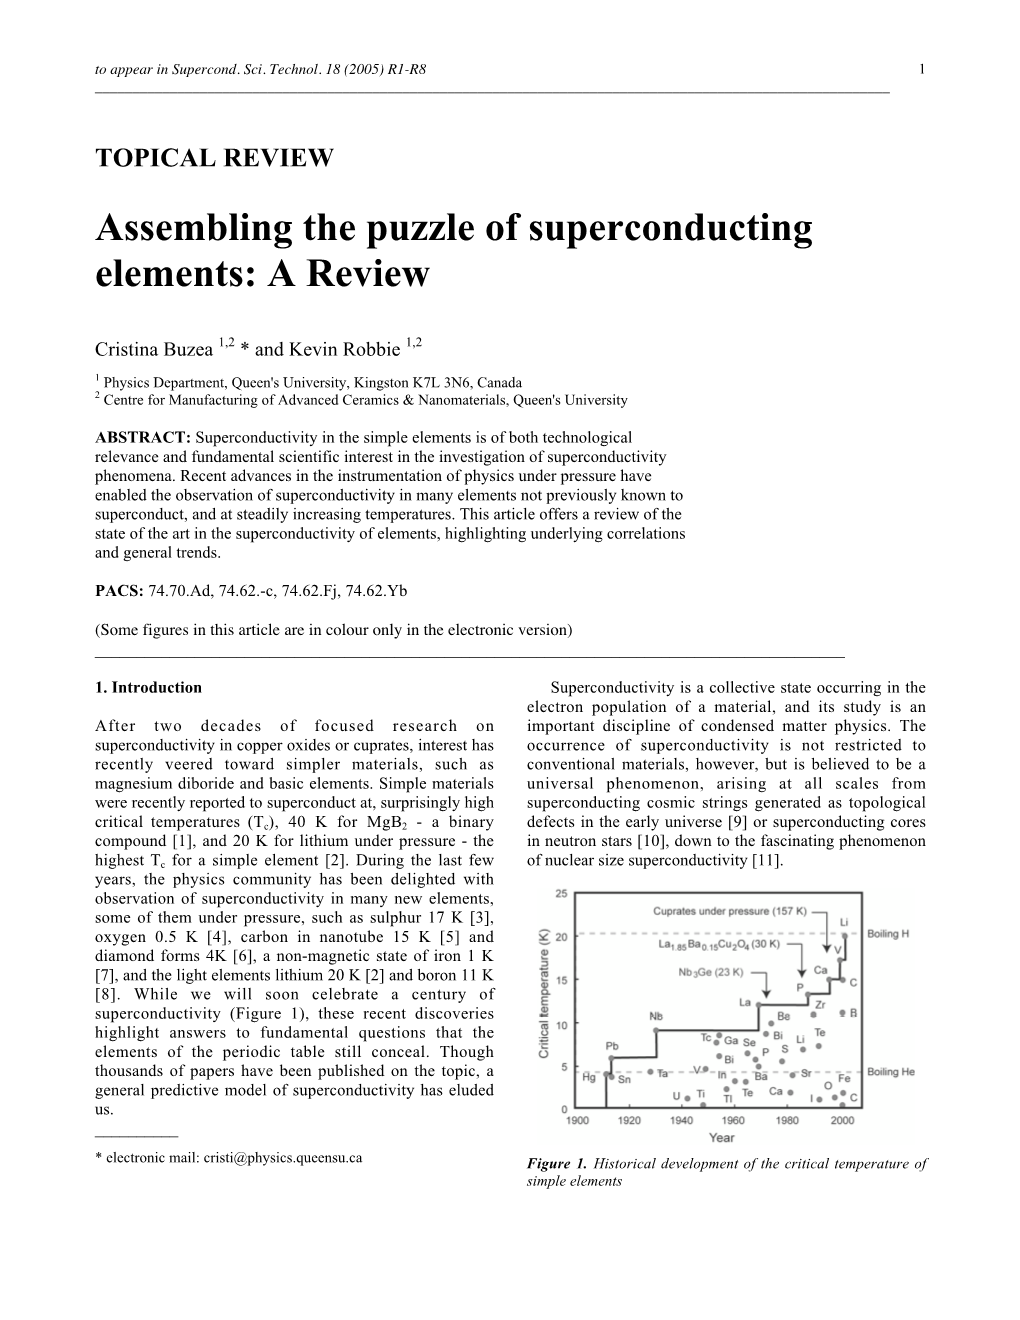 Assembling the Puzzle of Superconducting Elements: a Review